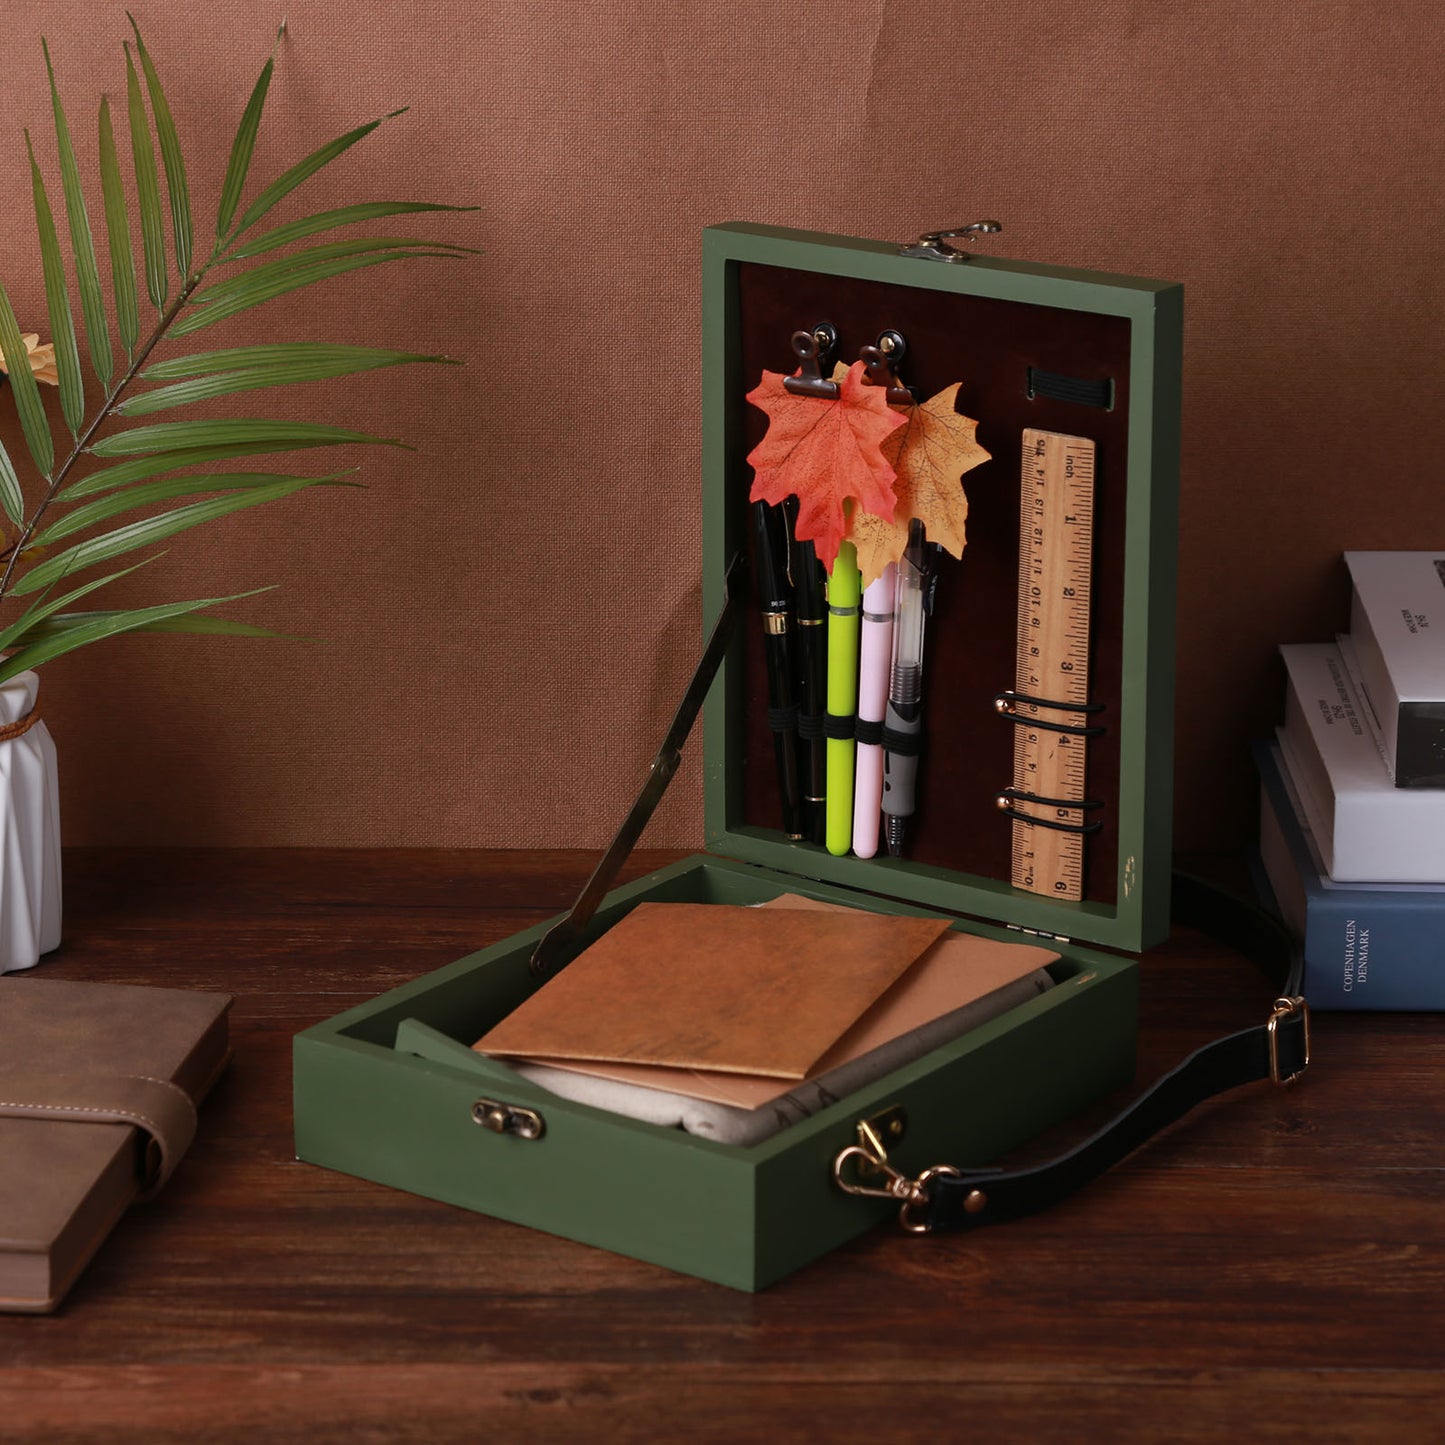 Messenger Wood Box for Creatives, Writers & Artists